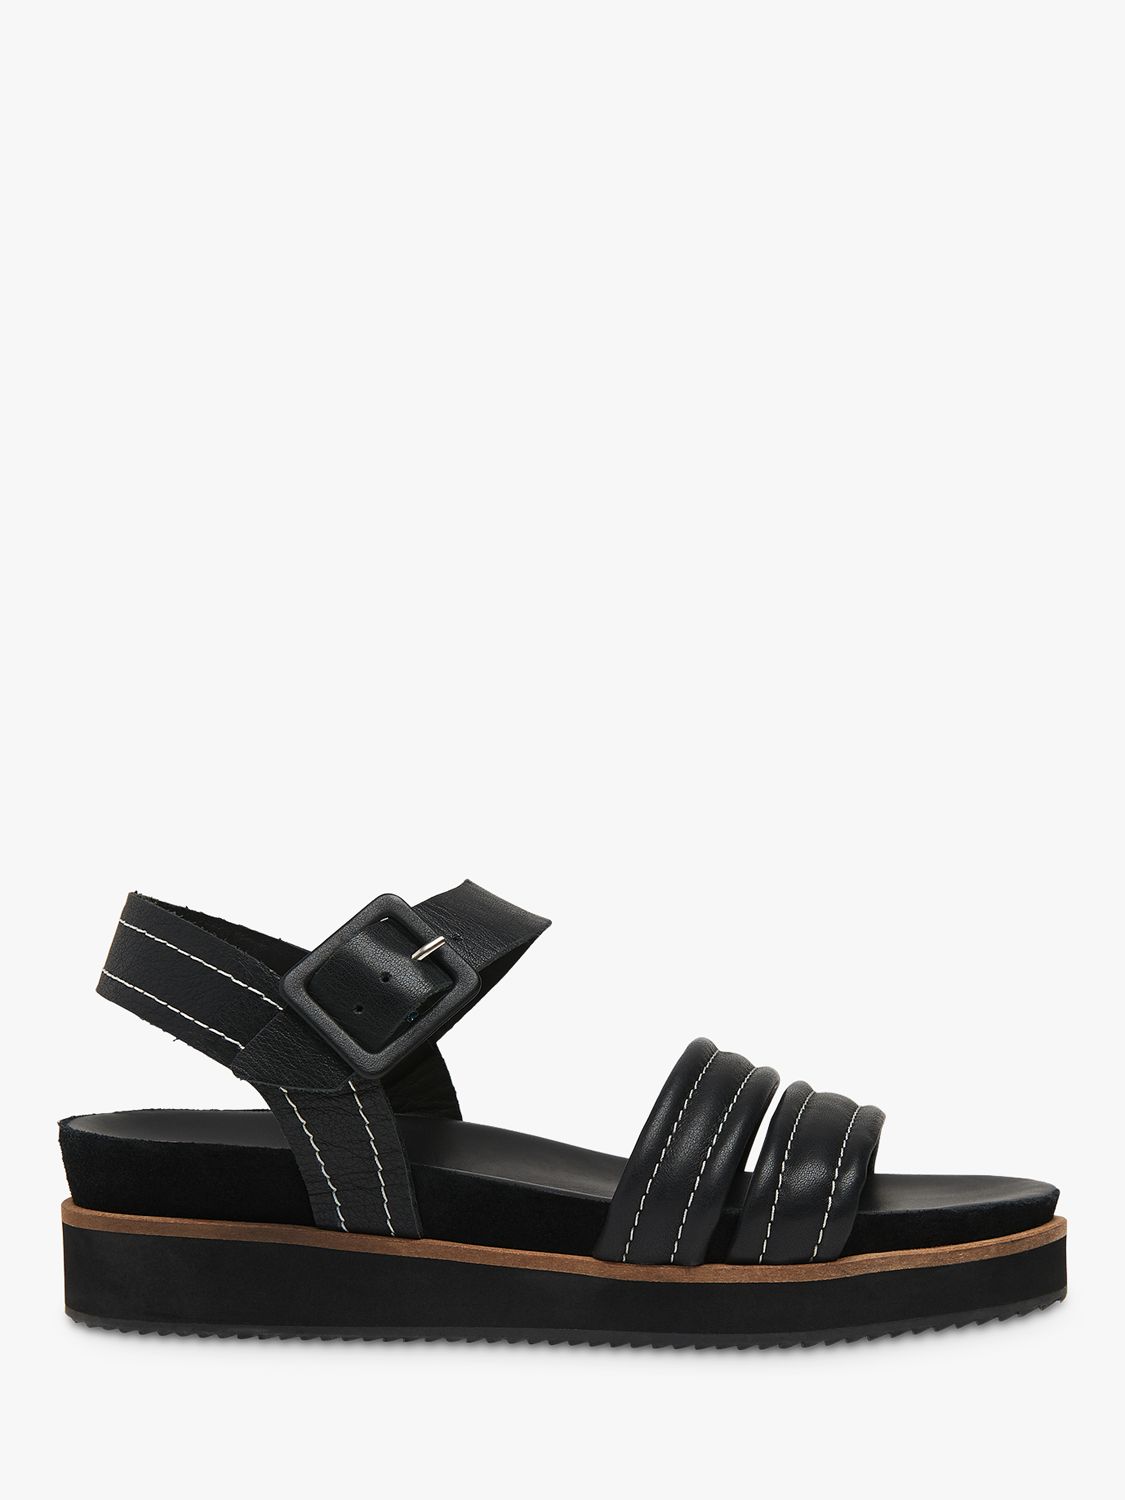 Whistles Koby Leather Contrast Stitch Sandals, Black at John Lewis ...